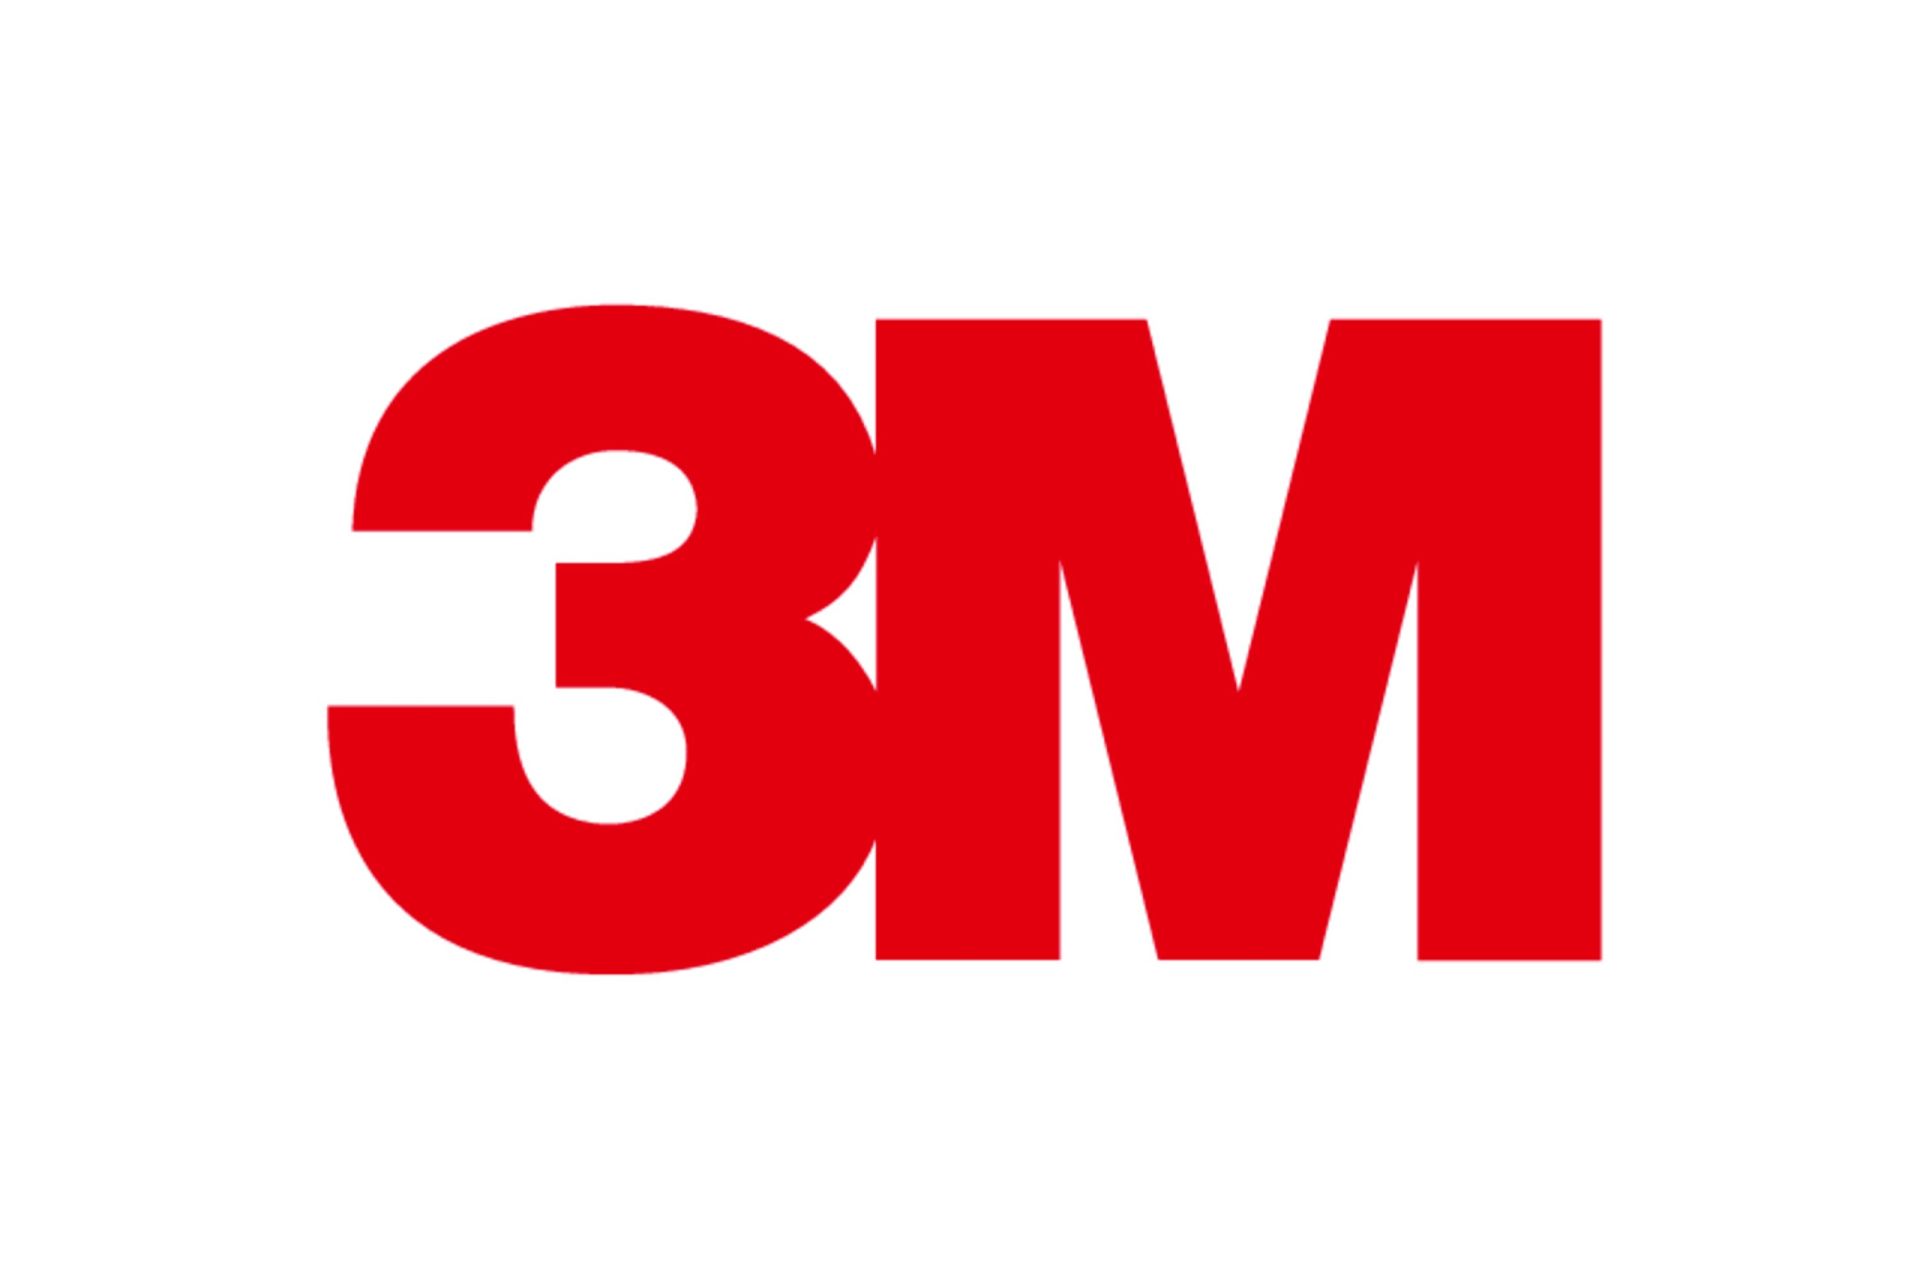 Exeger announces strategic collaboration with 3M to enhance worker safety equipment with self-charging technology